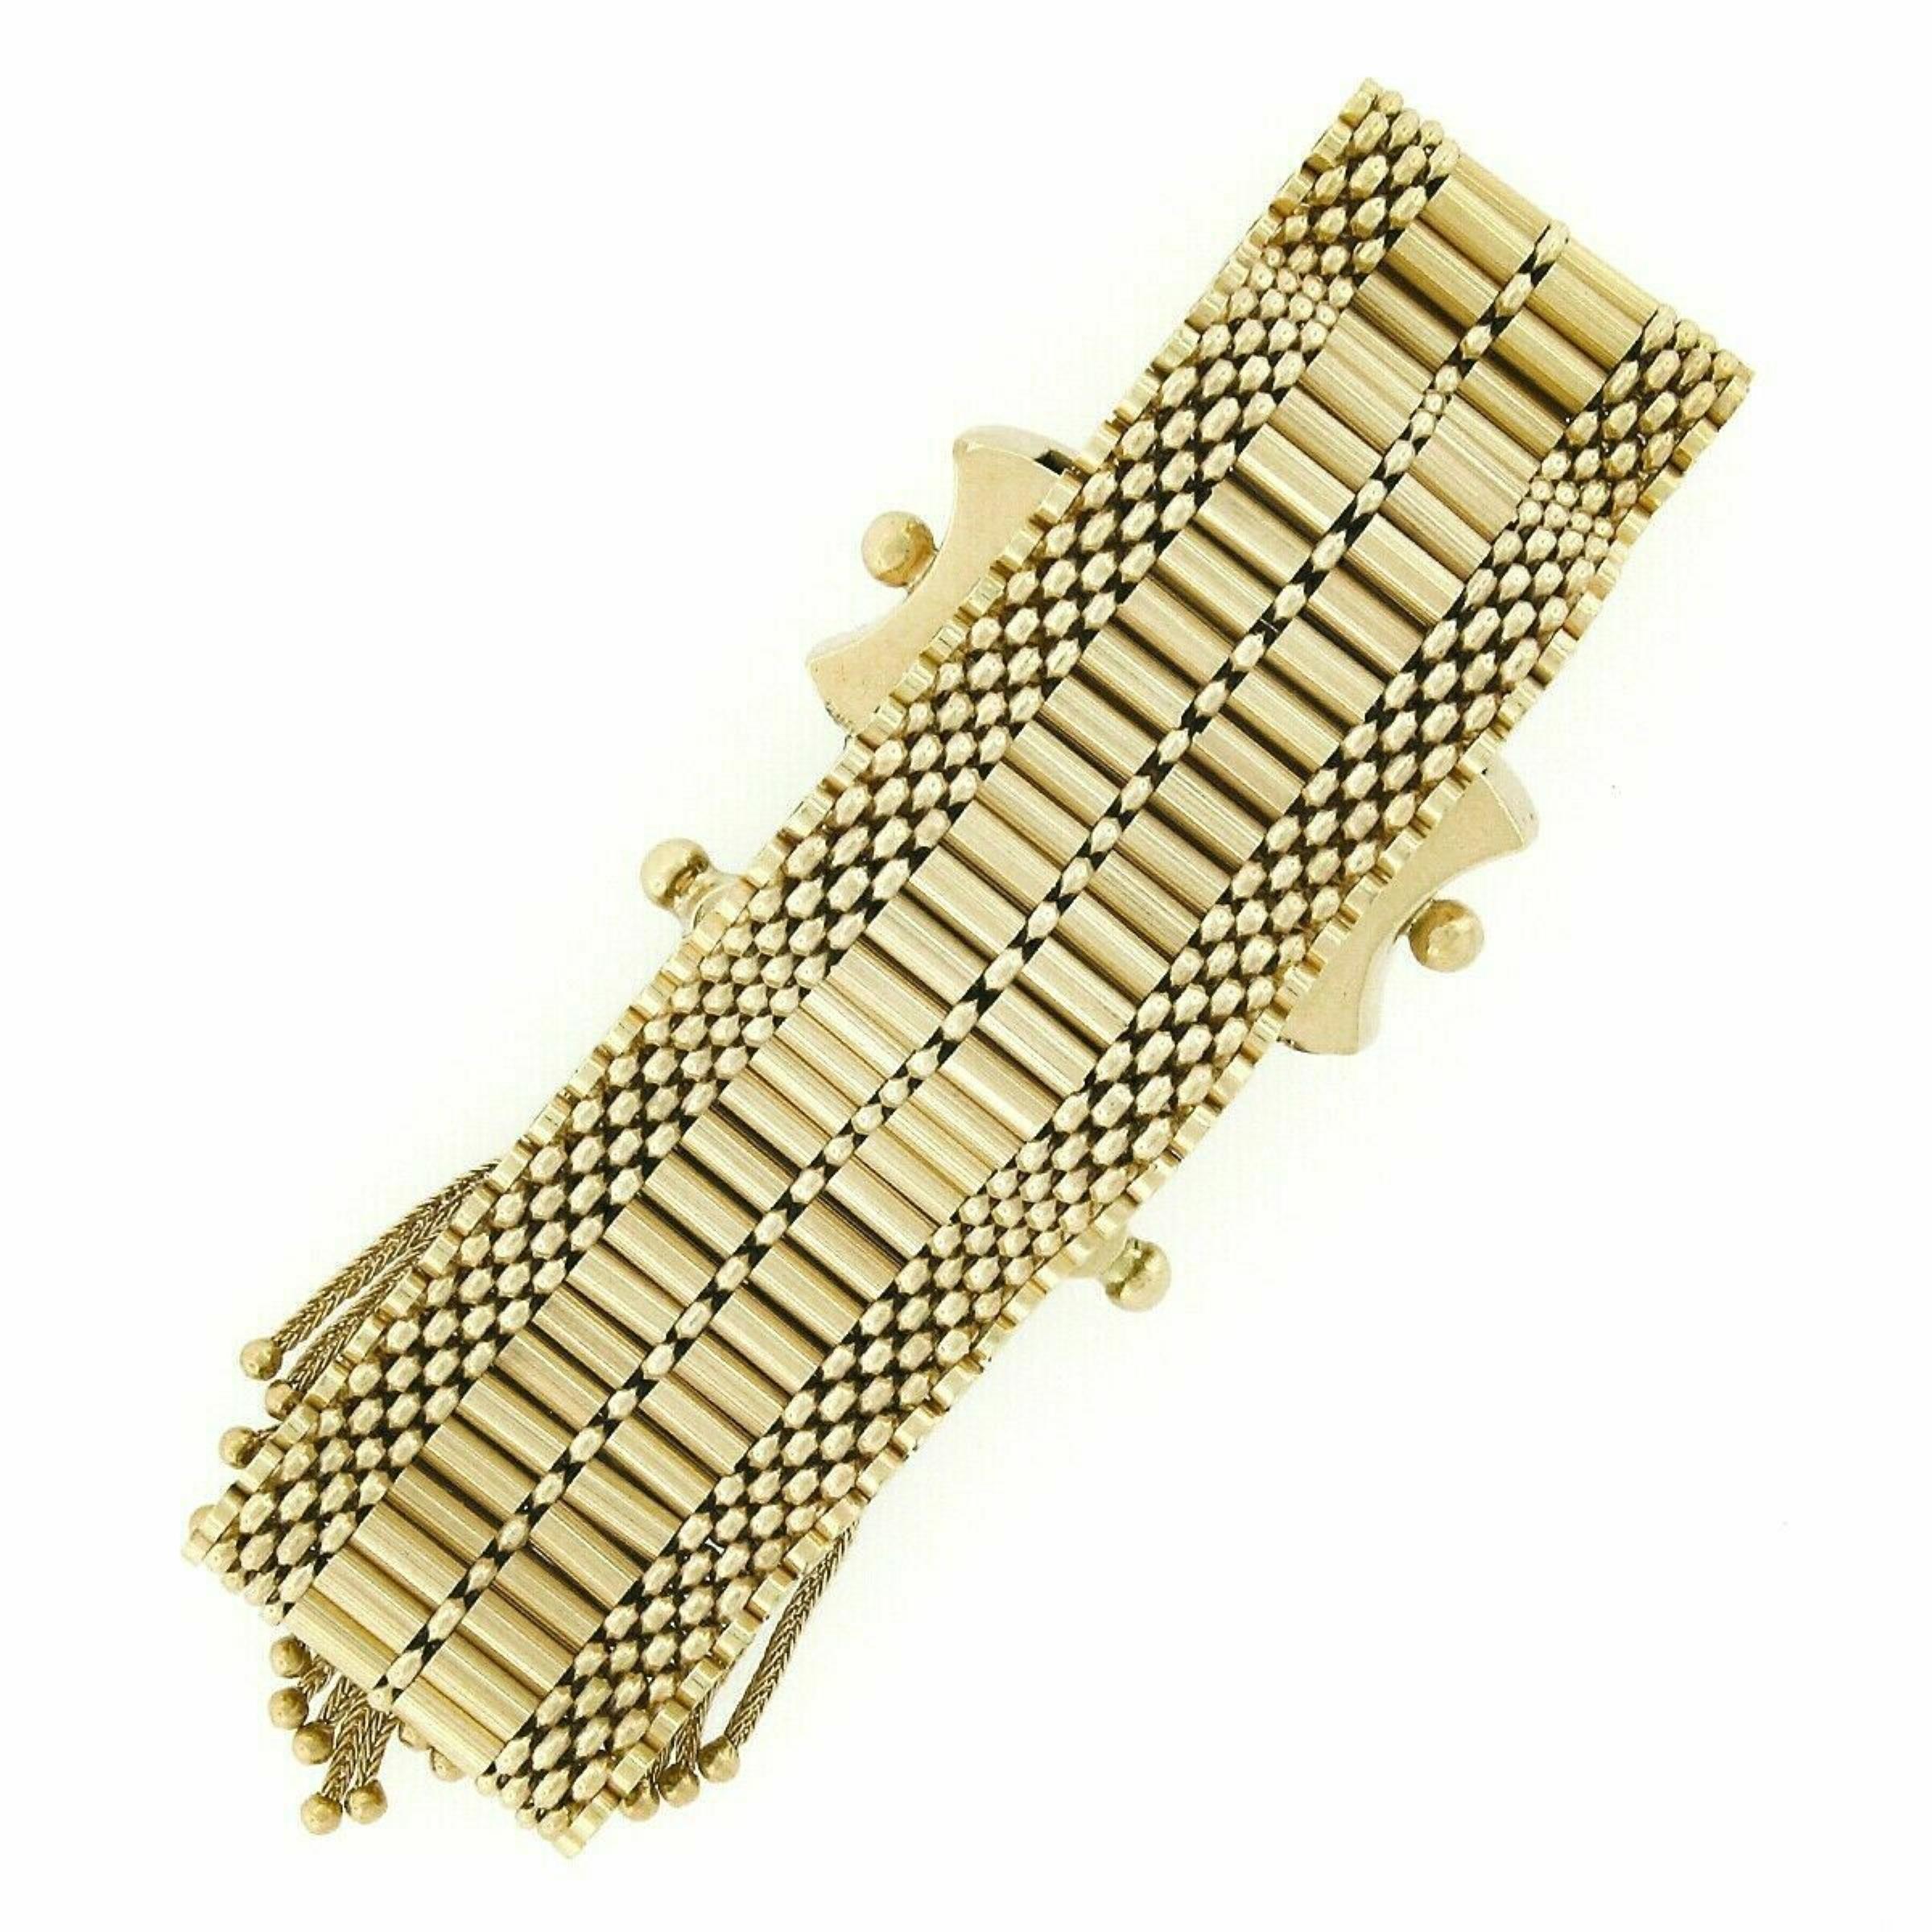 You are looking at a gorgeous vintage strap bracelet that was crafted in solid 14k yellow gold featuring a magnificent Victorian revival design. The wide strap is constructed from neatly set round and bar links in which sit beautifully with a silky